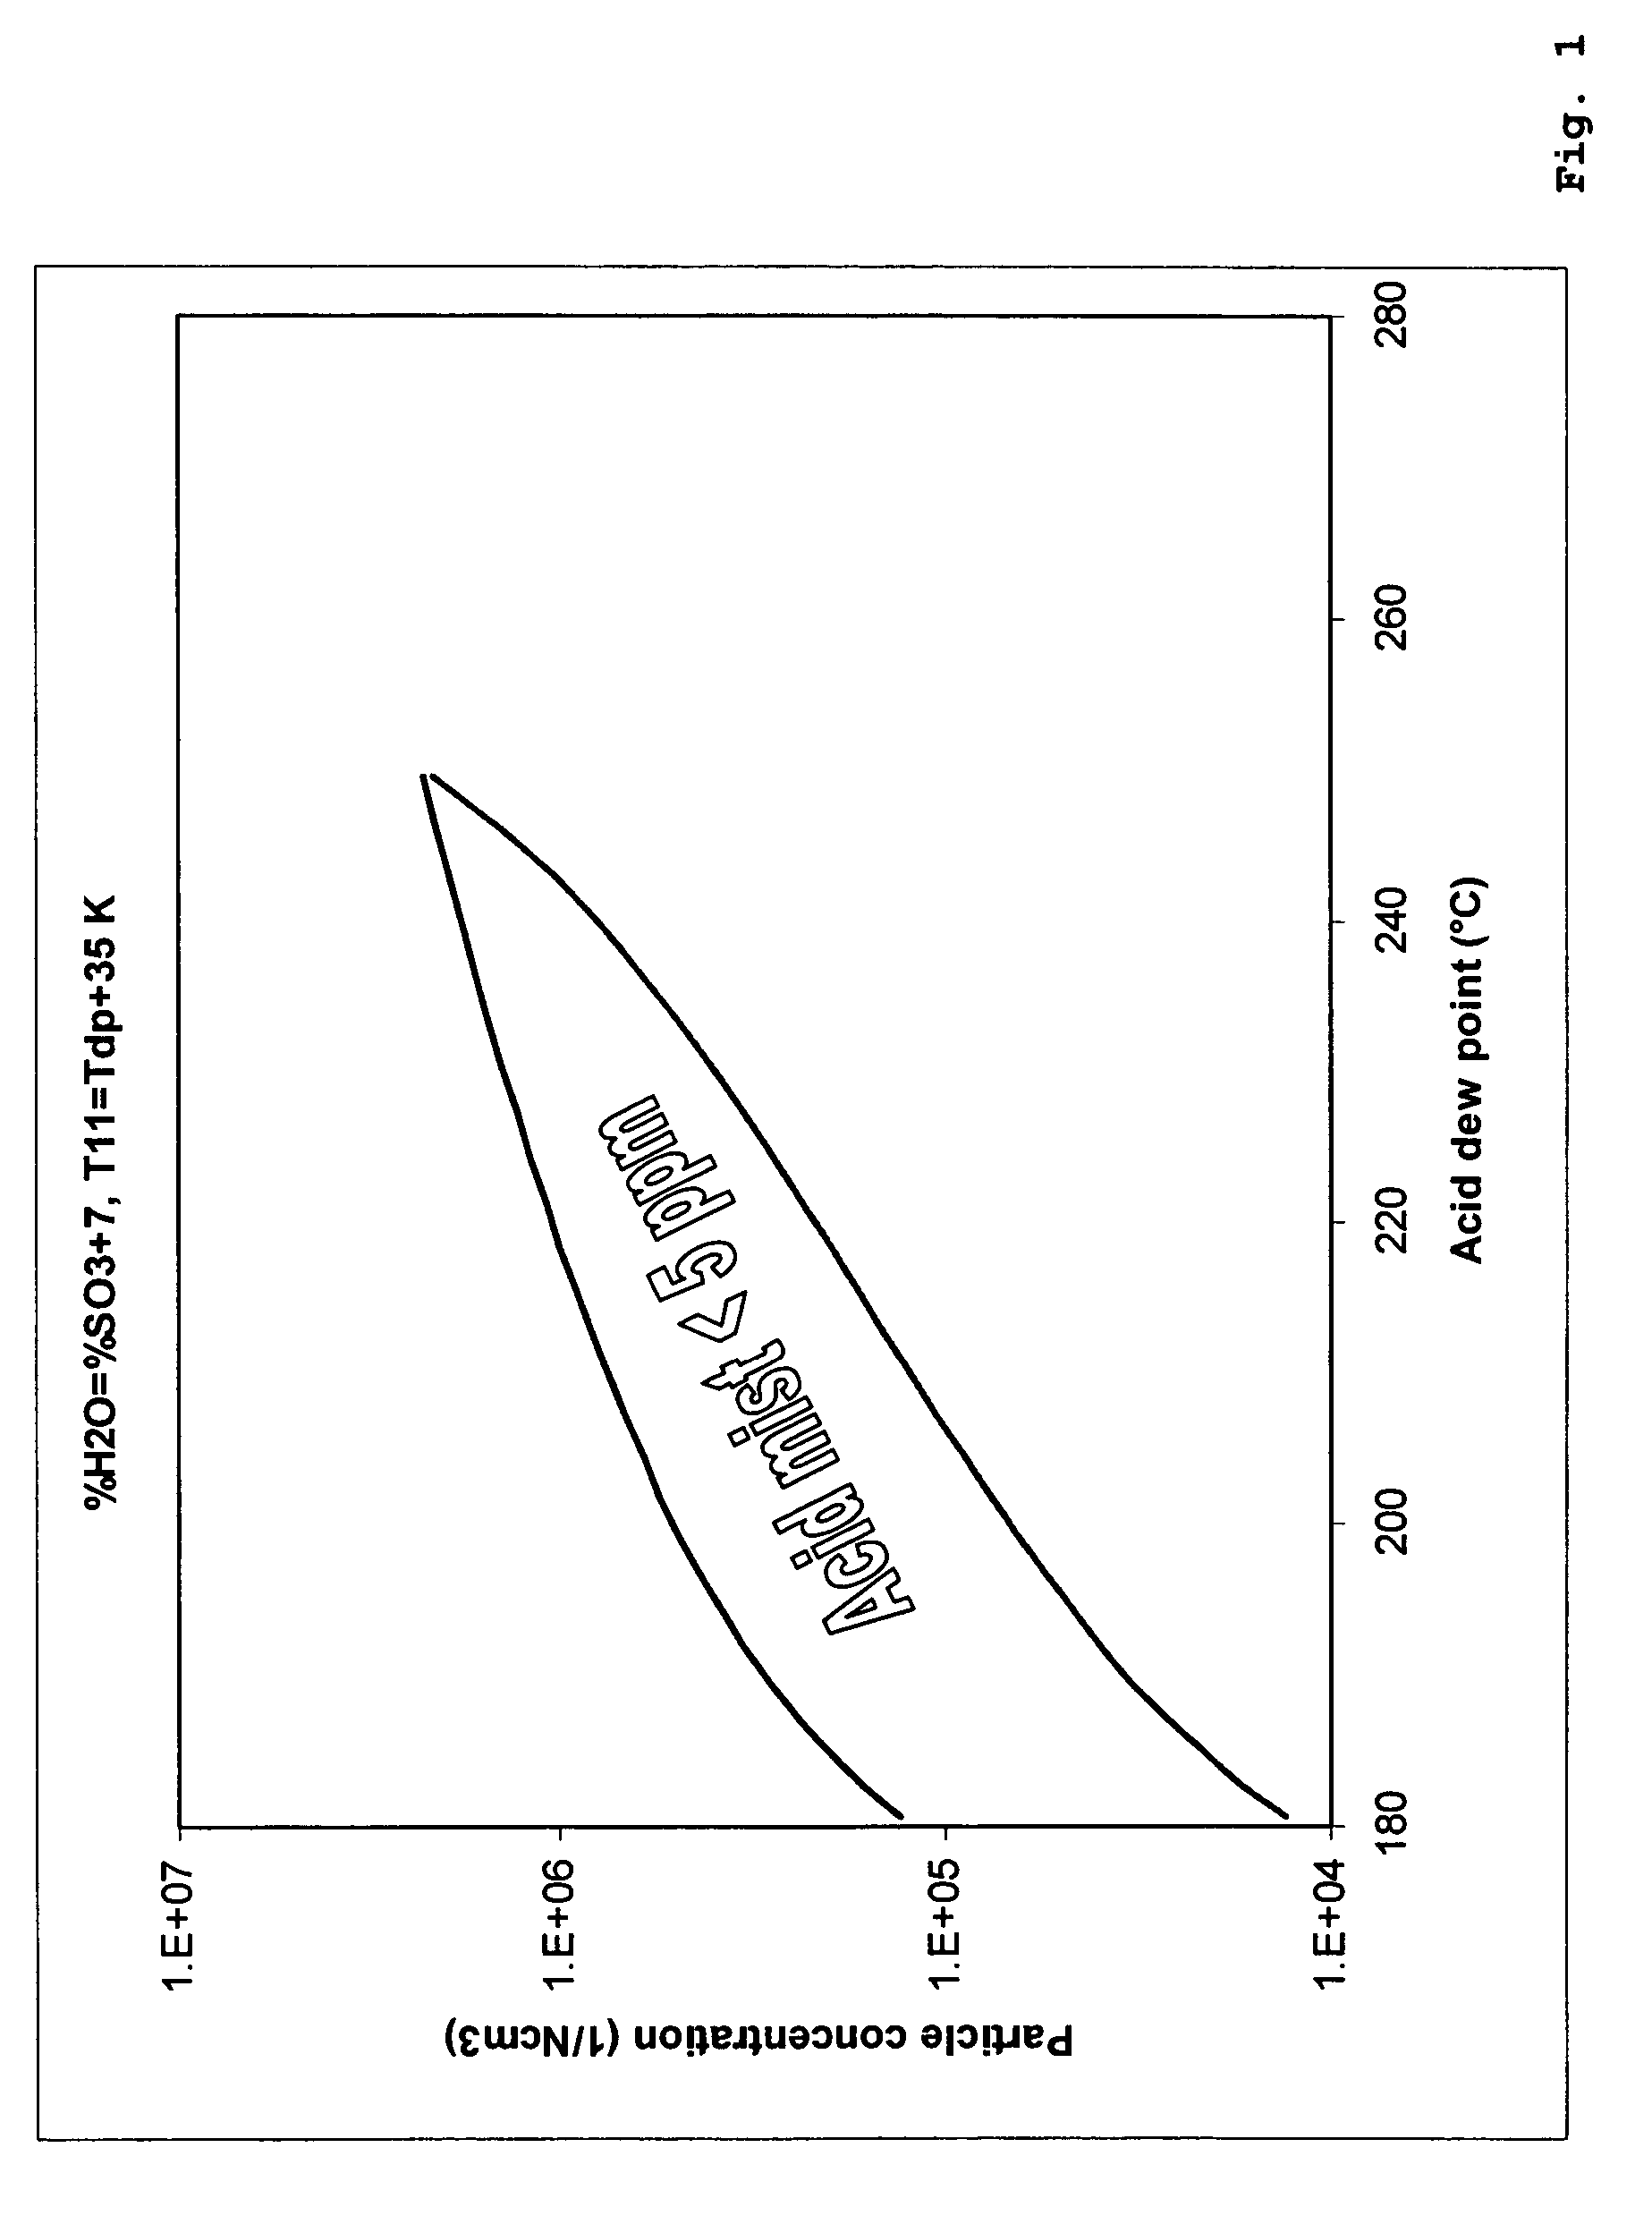 Process for the production of sulfuric acid